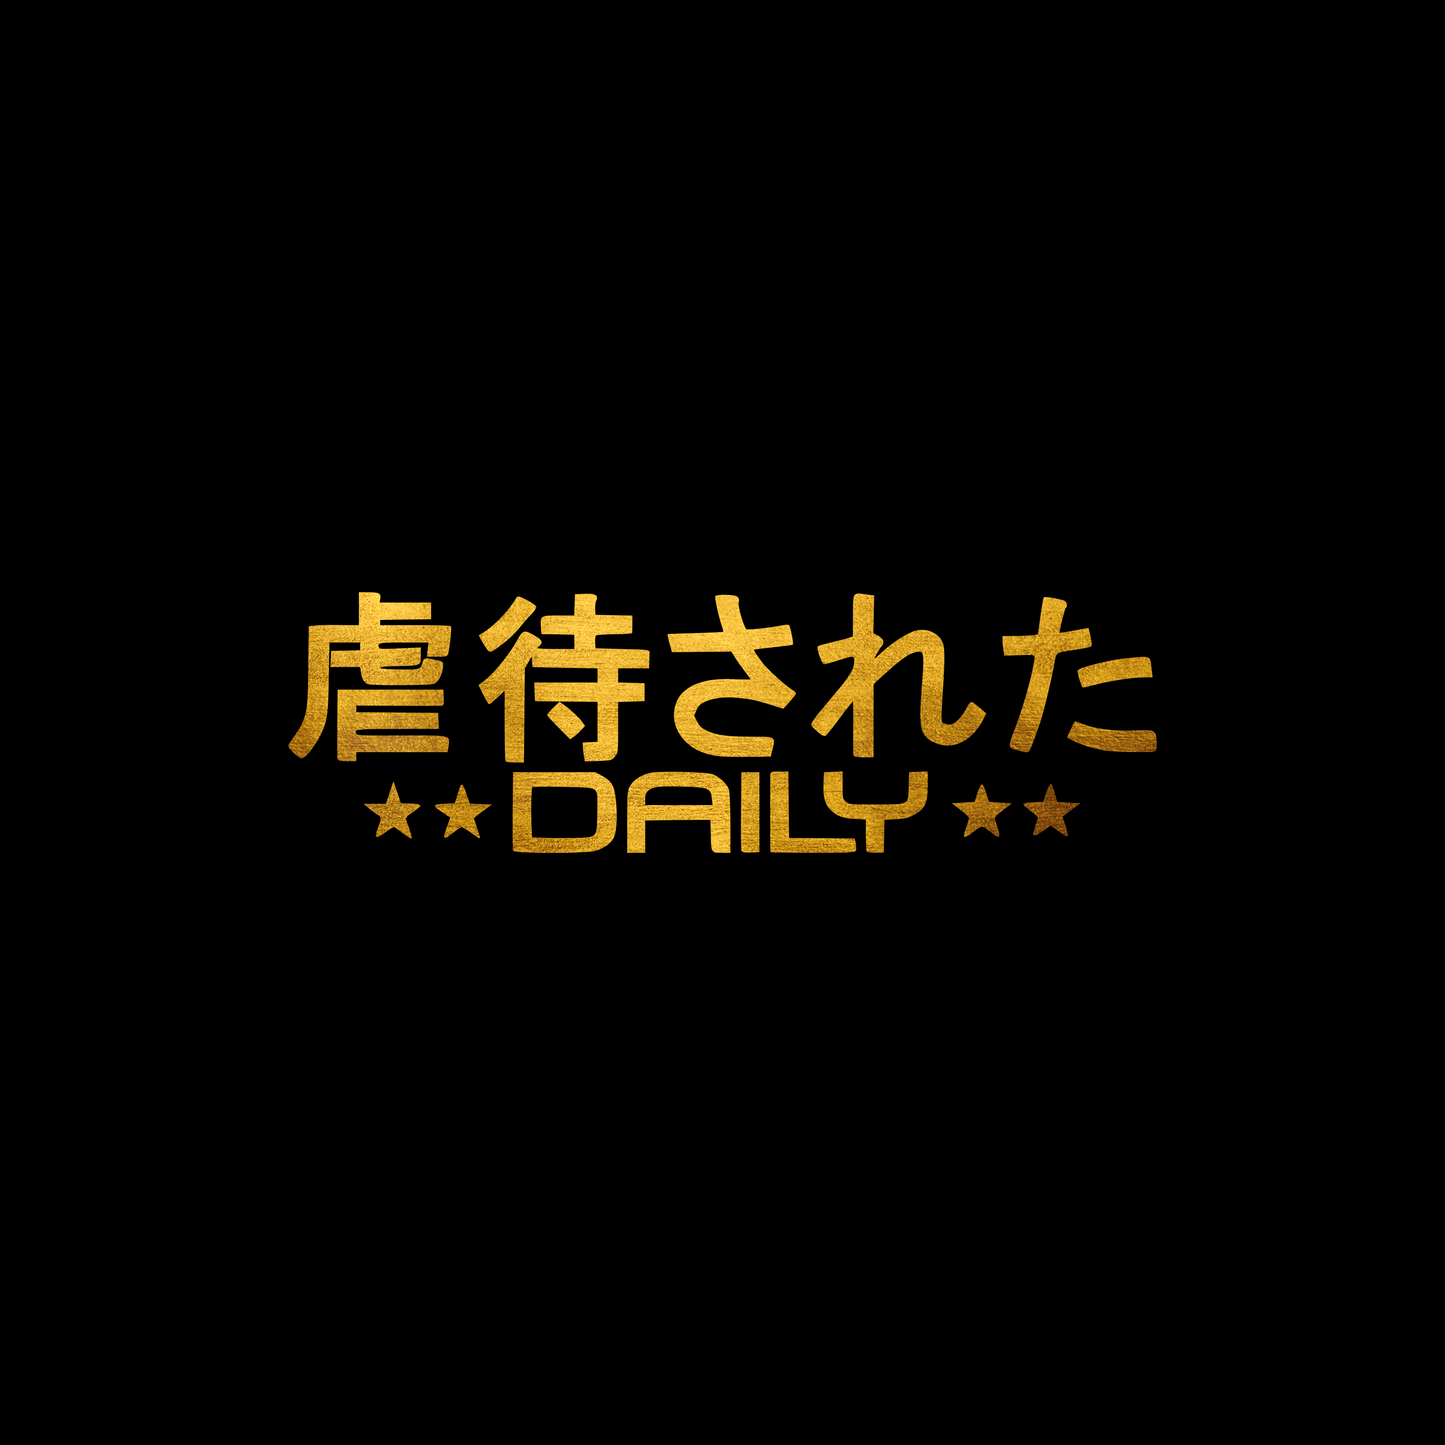 Daily japanese sticker decal